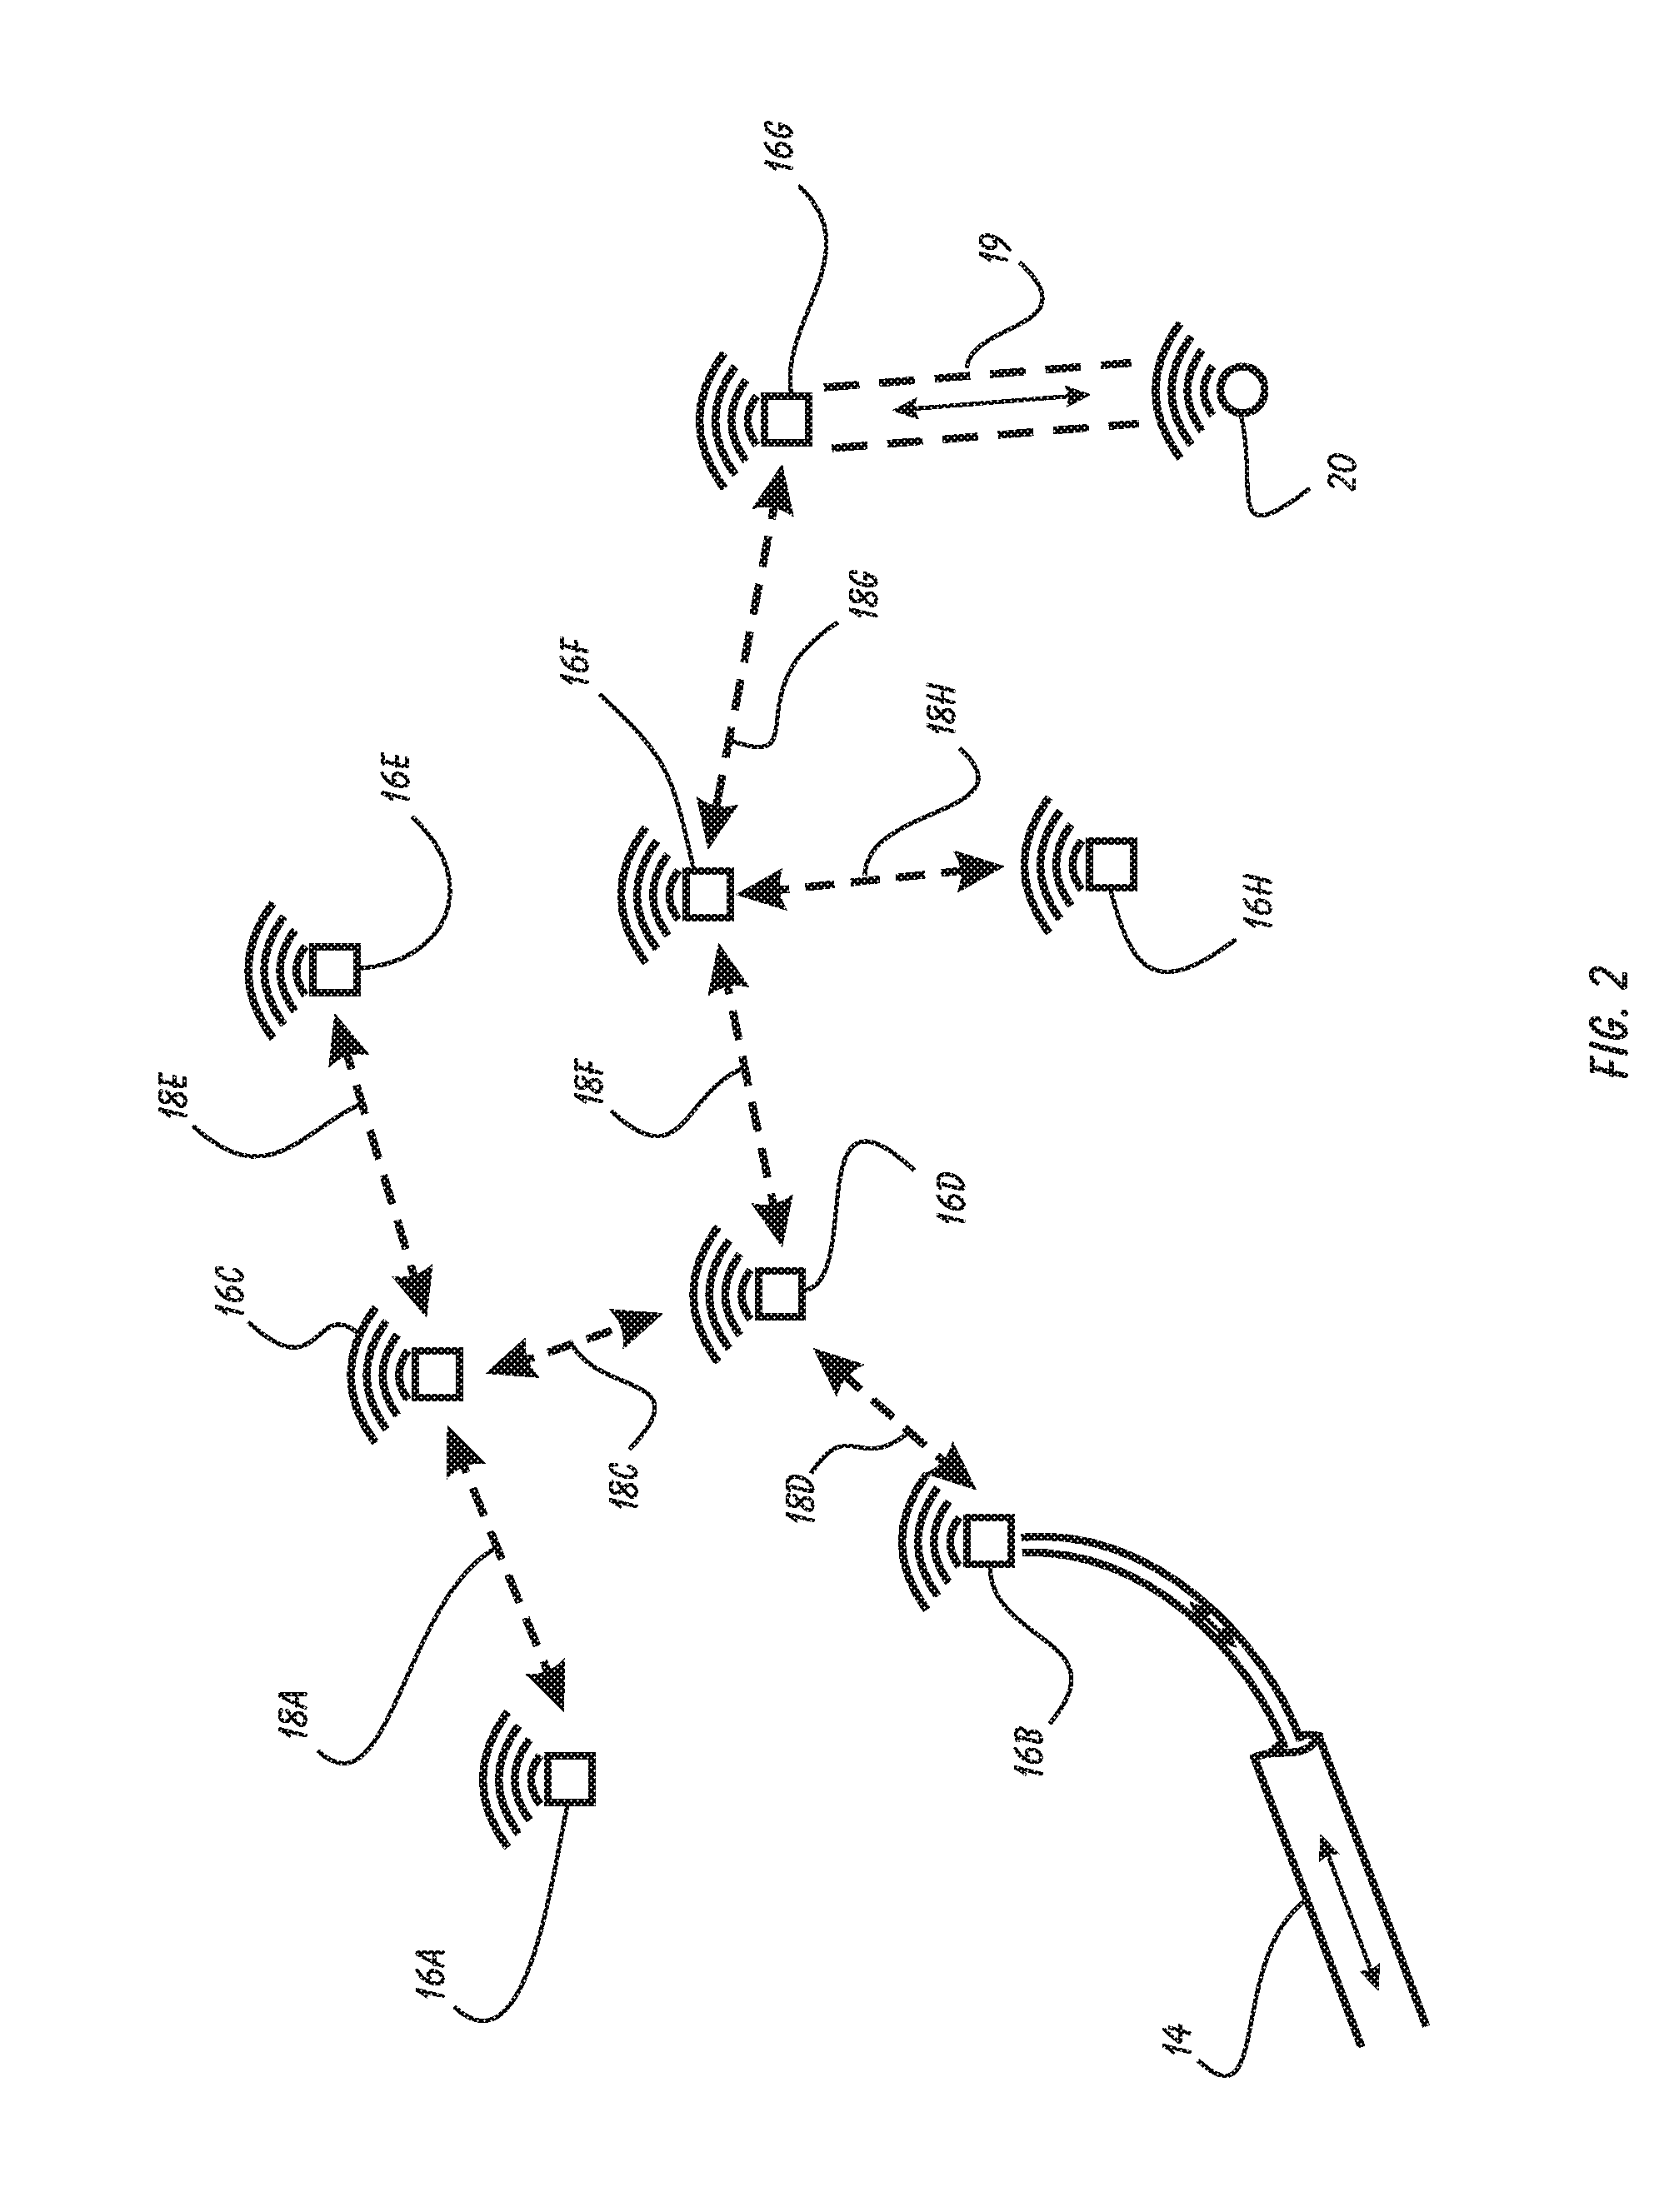 Combination Lamp and Wireless Network Access System